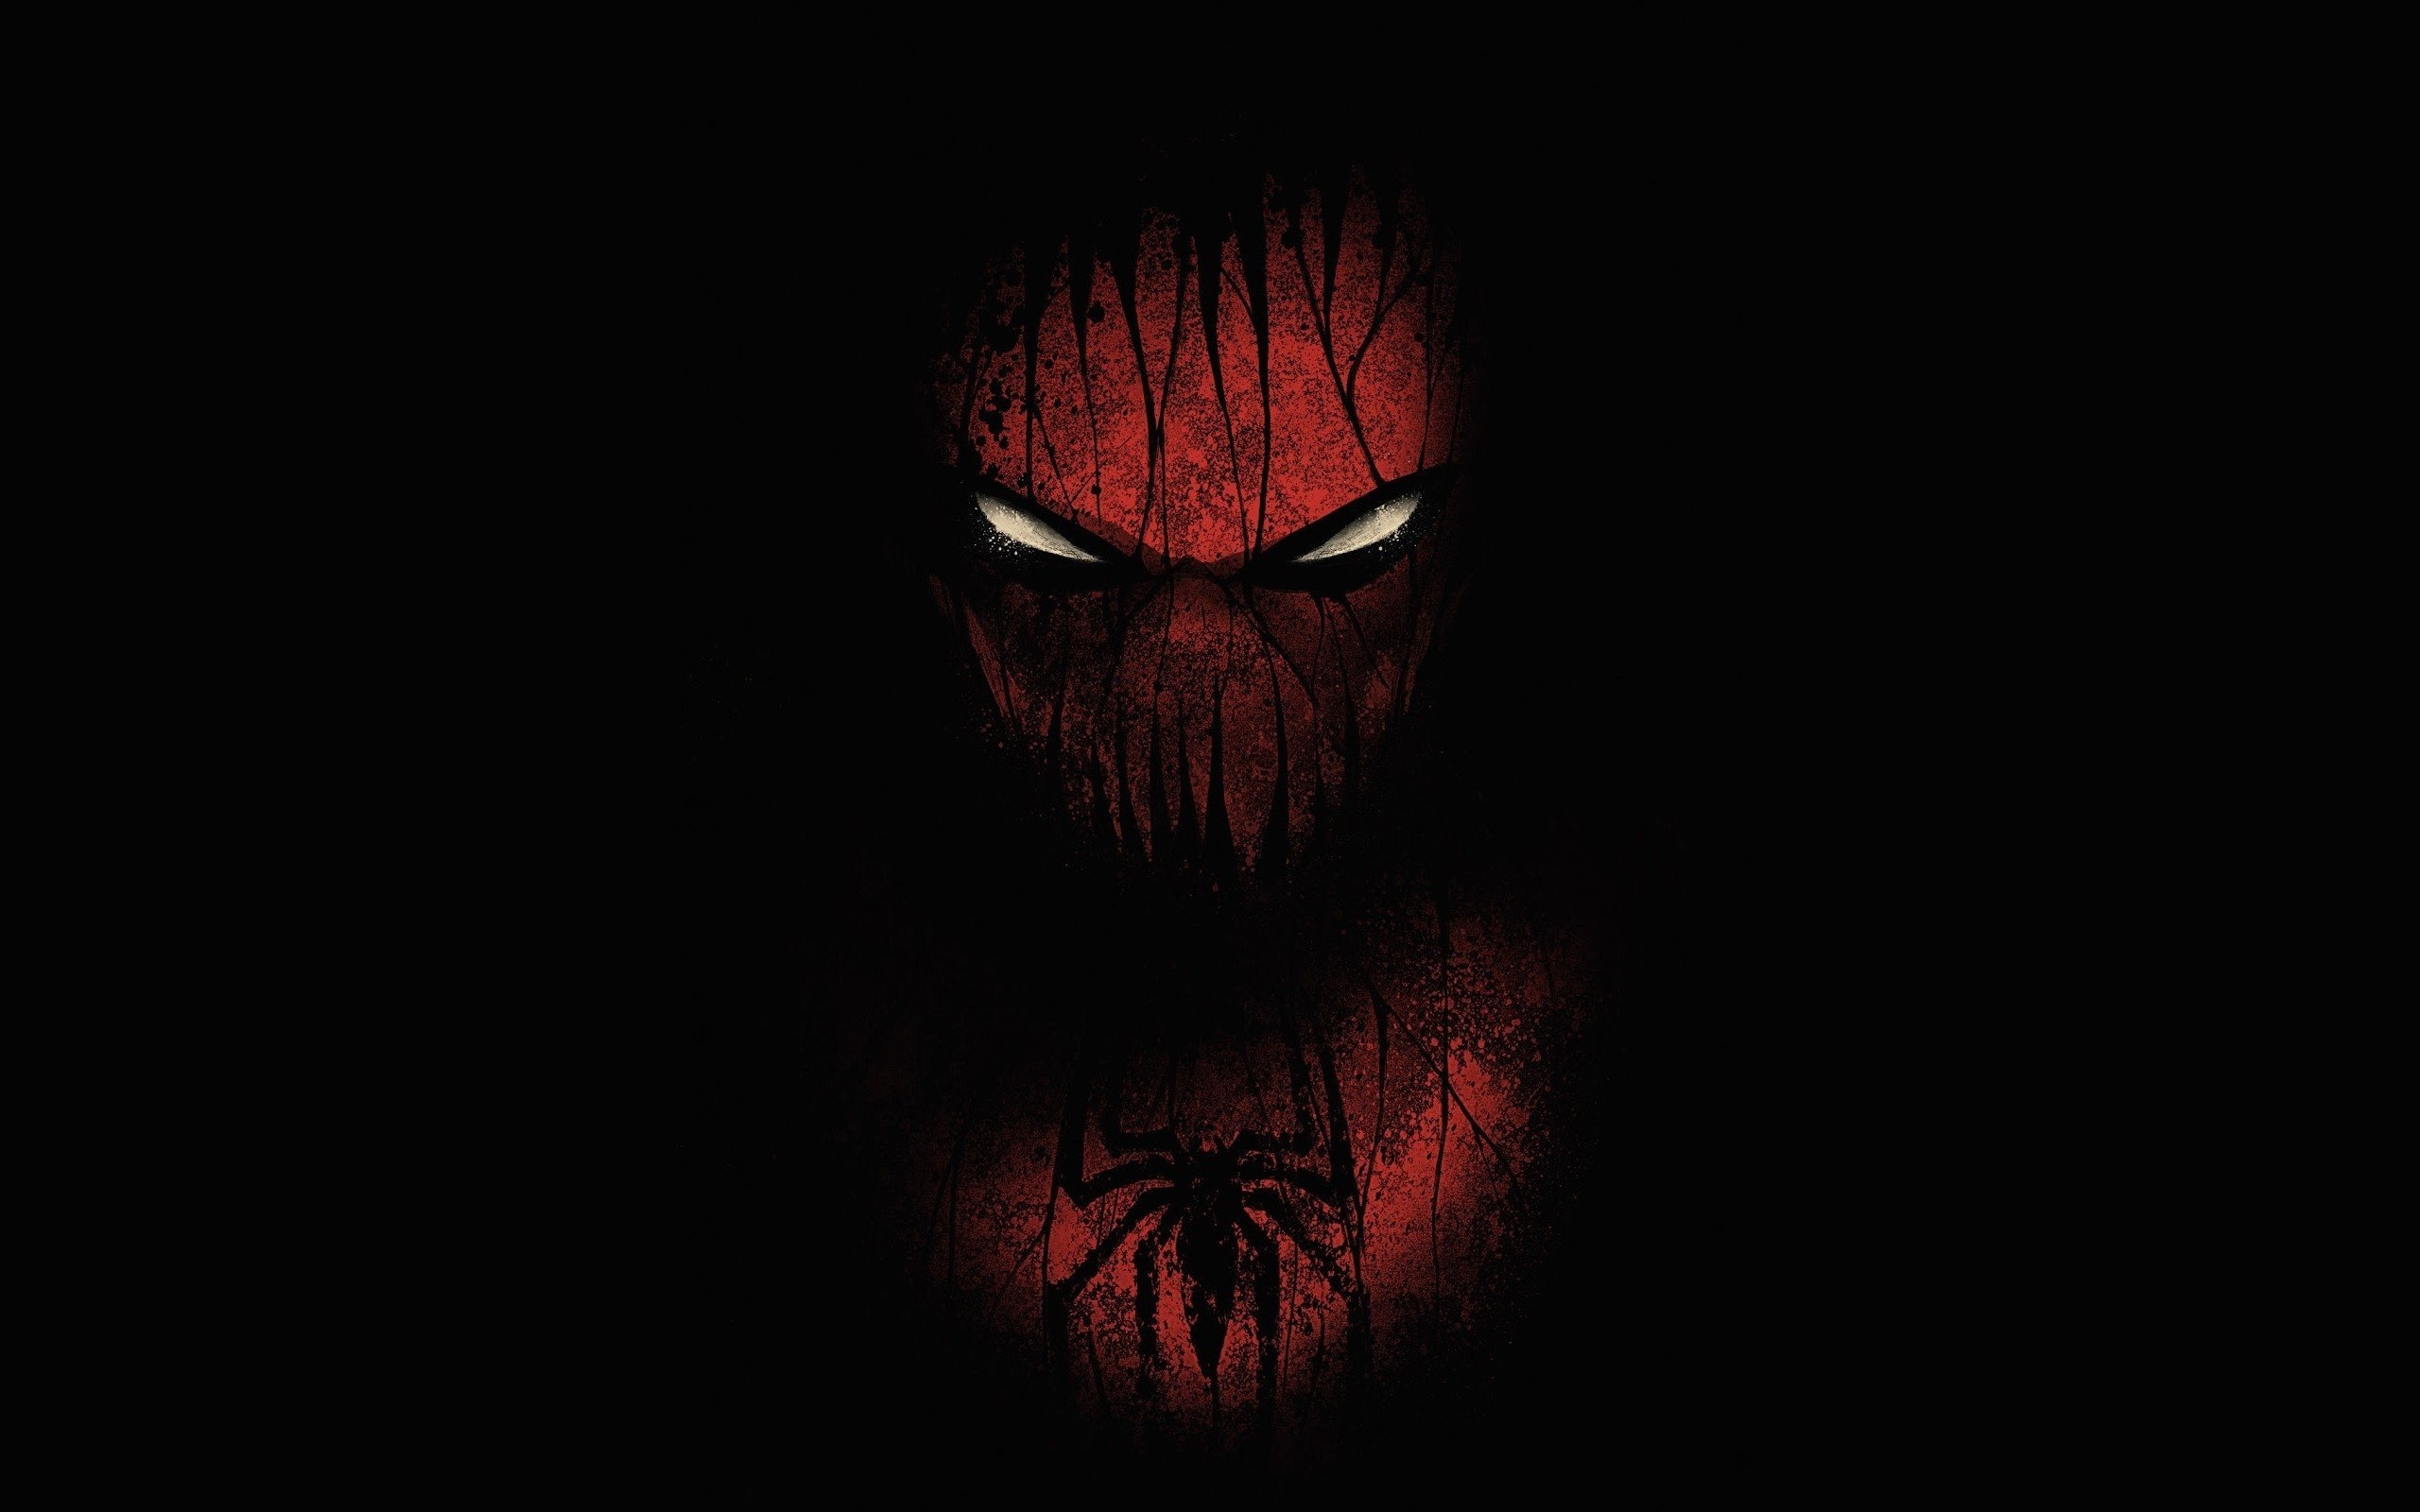 Download 2560x1600 Wallpaper Red And Black Spiderman Minimal Images, Photos, Reviews